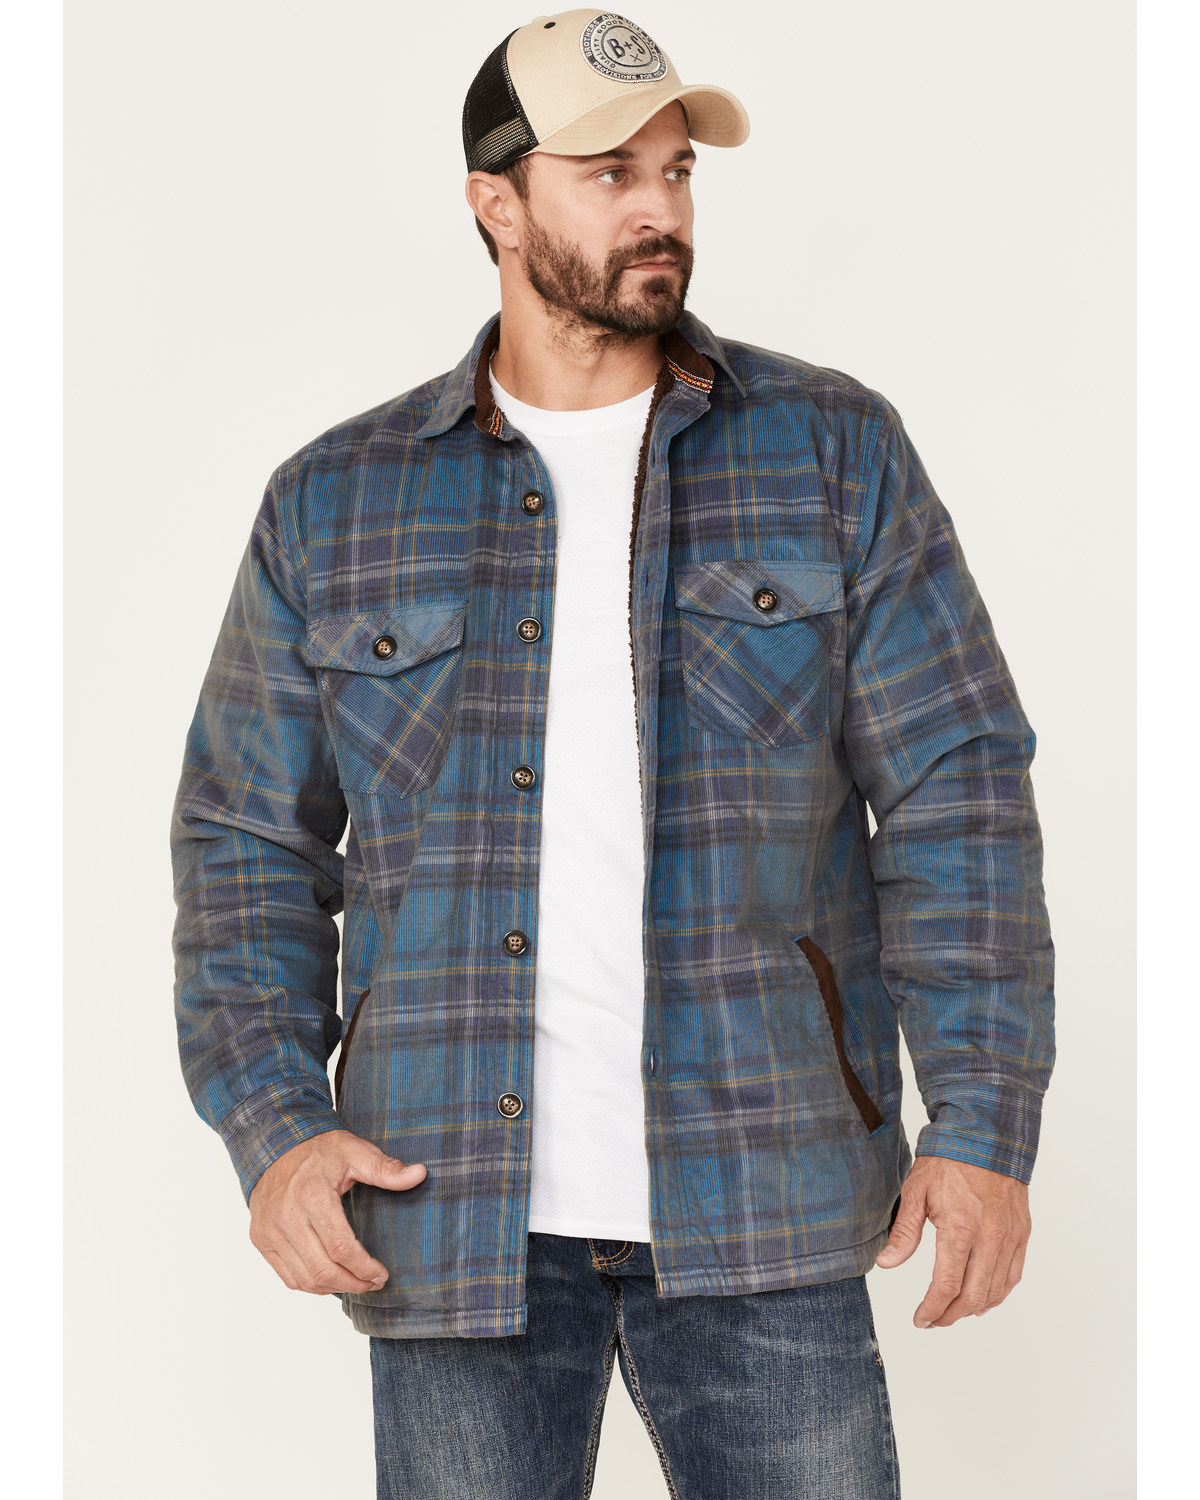 Sculy Men's Plaid Print Corduroy Sherpa Lined Button Jacket